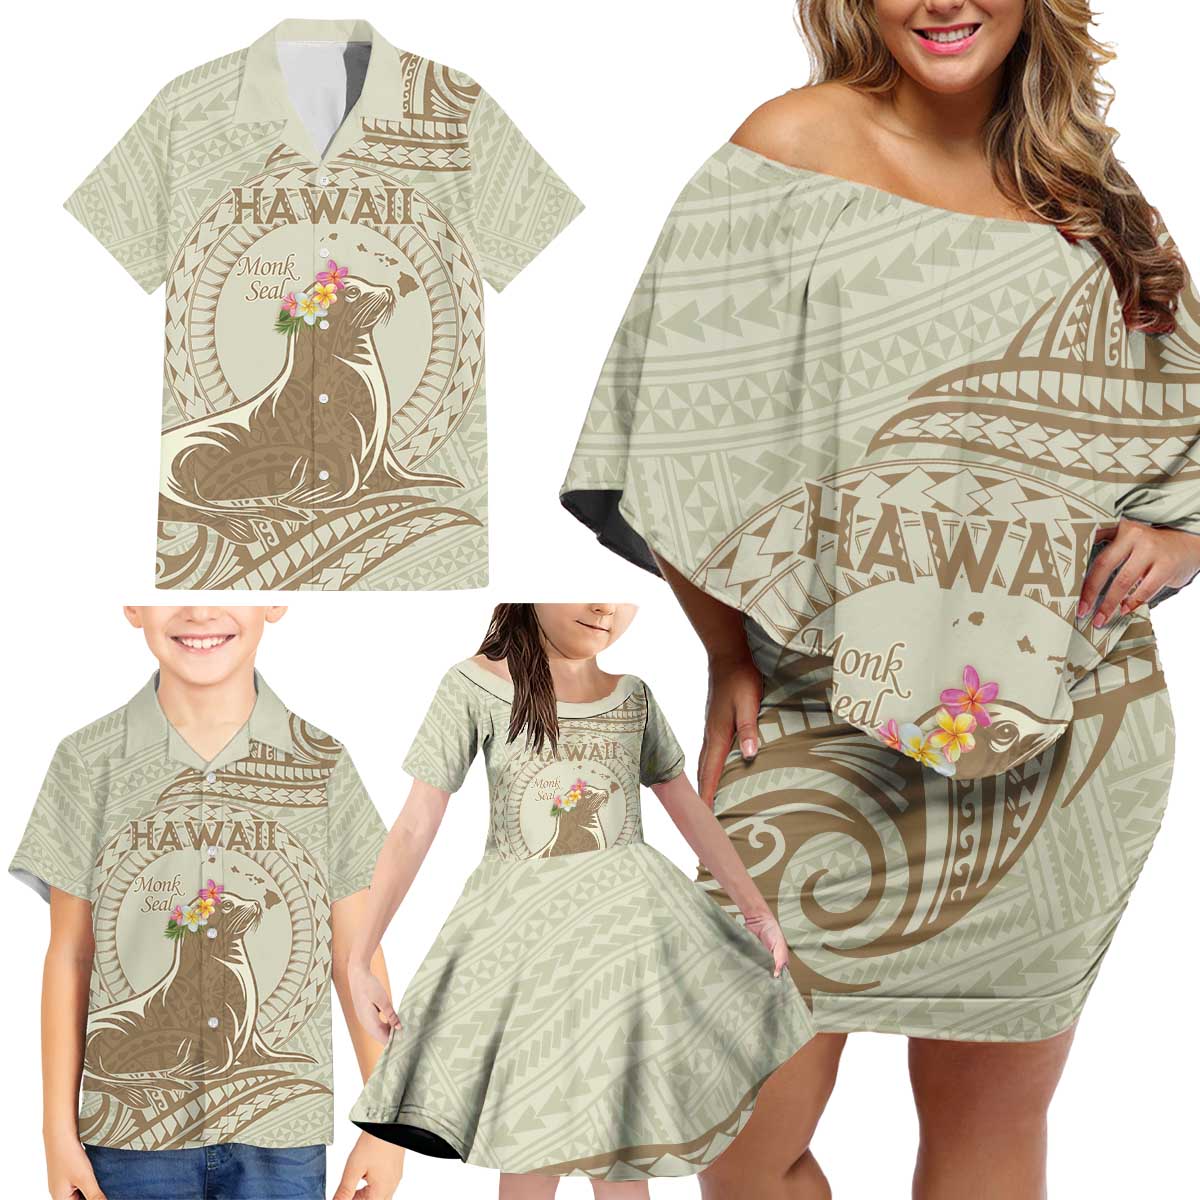 Personalised Hawaii Monk Seal Family Matching Off Shoulder Short Dress and Hawaiian Shirt Polynesian Tattoo With Tropical Flowers - Beige Pastel